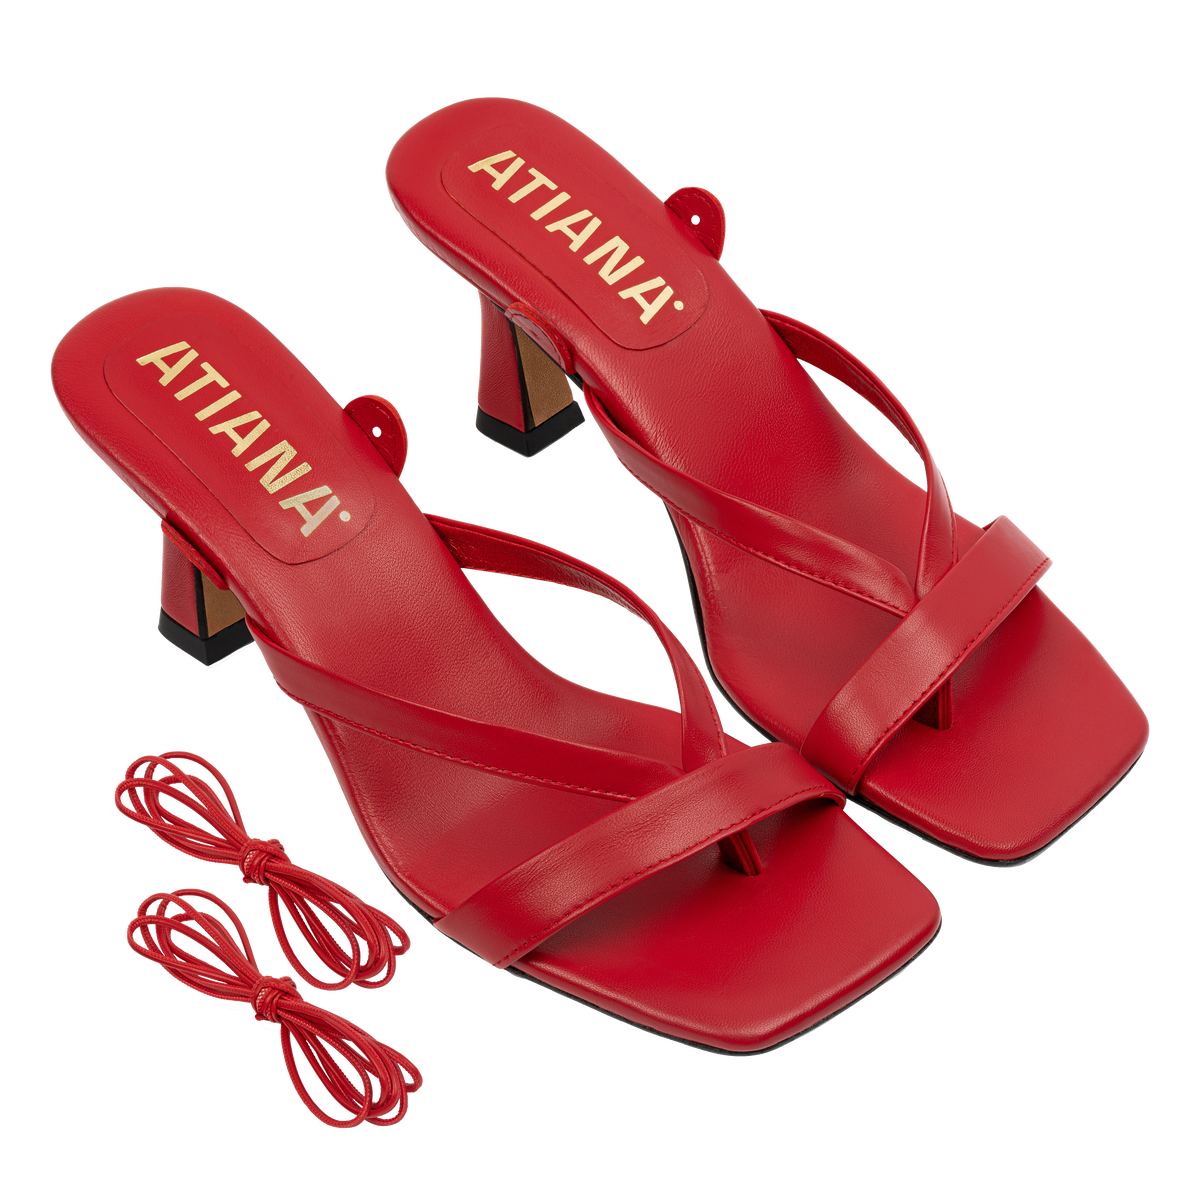 Atiana - Ying Yang - Women's red Leather Mules at The Nowhere Nation